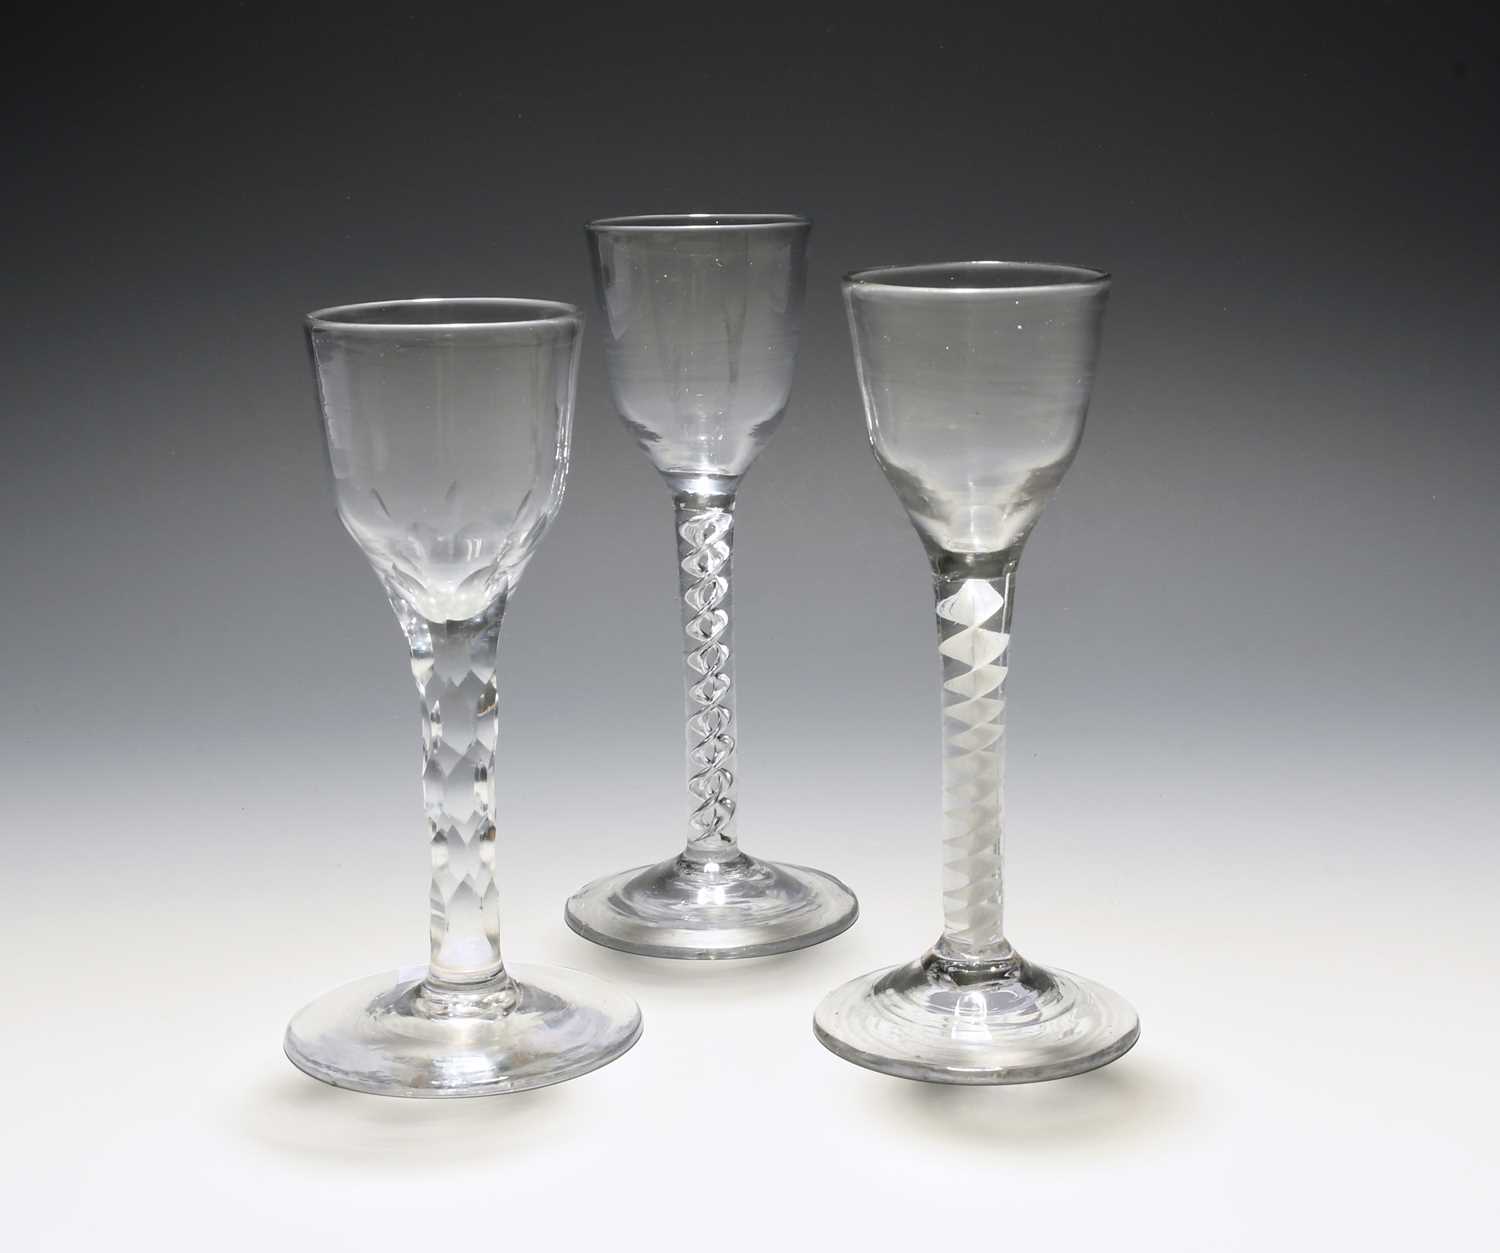 Three small wine glasses, c.1760, with ogee bowls raised on varying stems, one with a mercury twist,